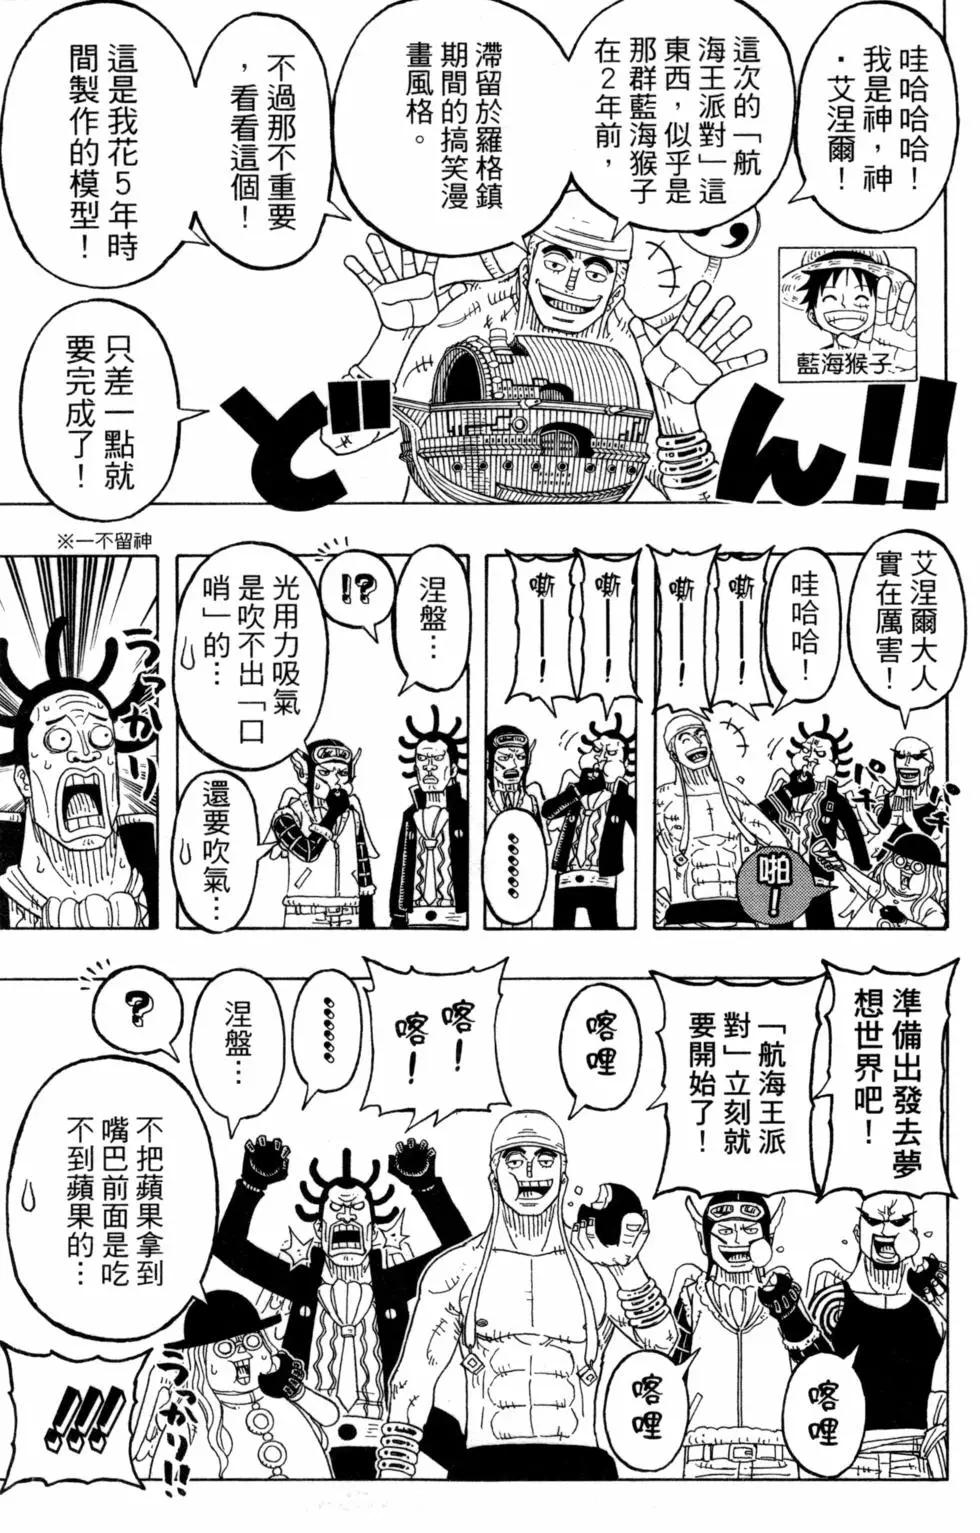 One piece party - 第06卷(2/4) - 8